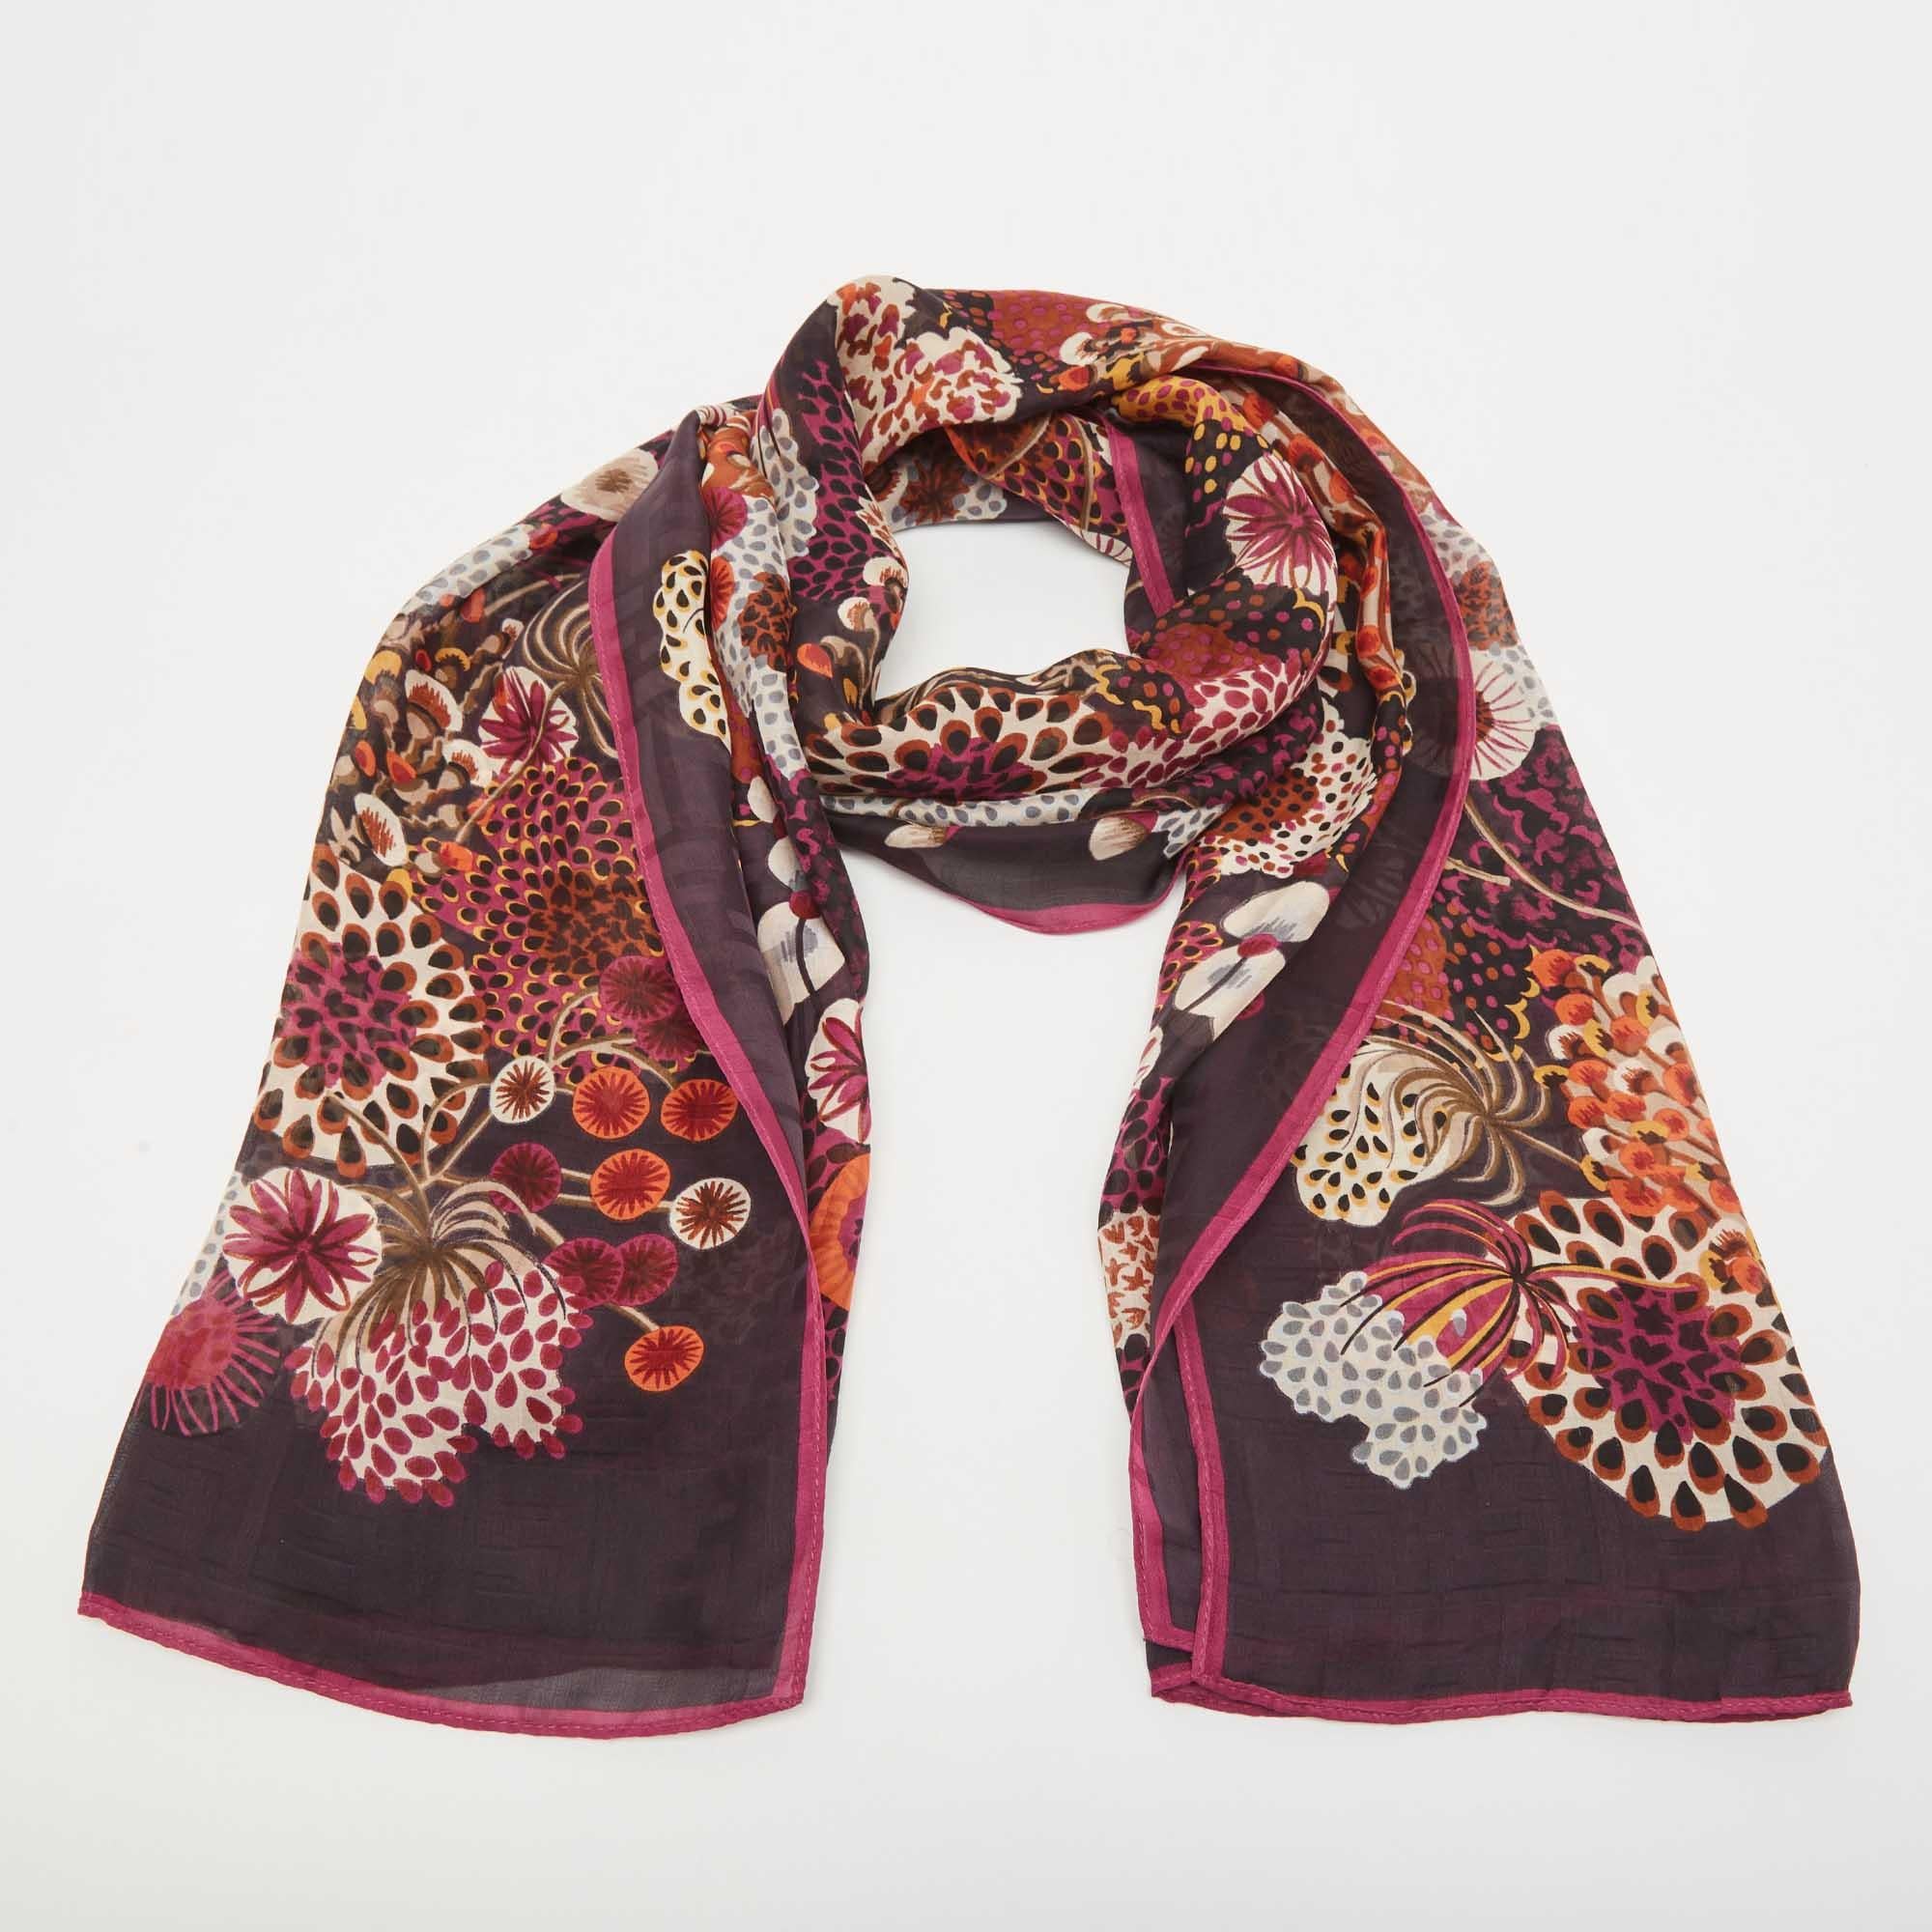 Made from quality fabric, this Fendi scarf is gorgeous. It is easy to style and luxurious in appeal.

